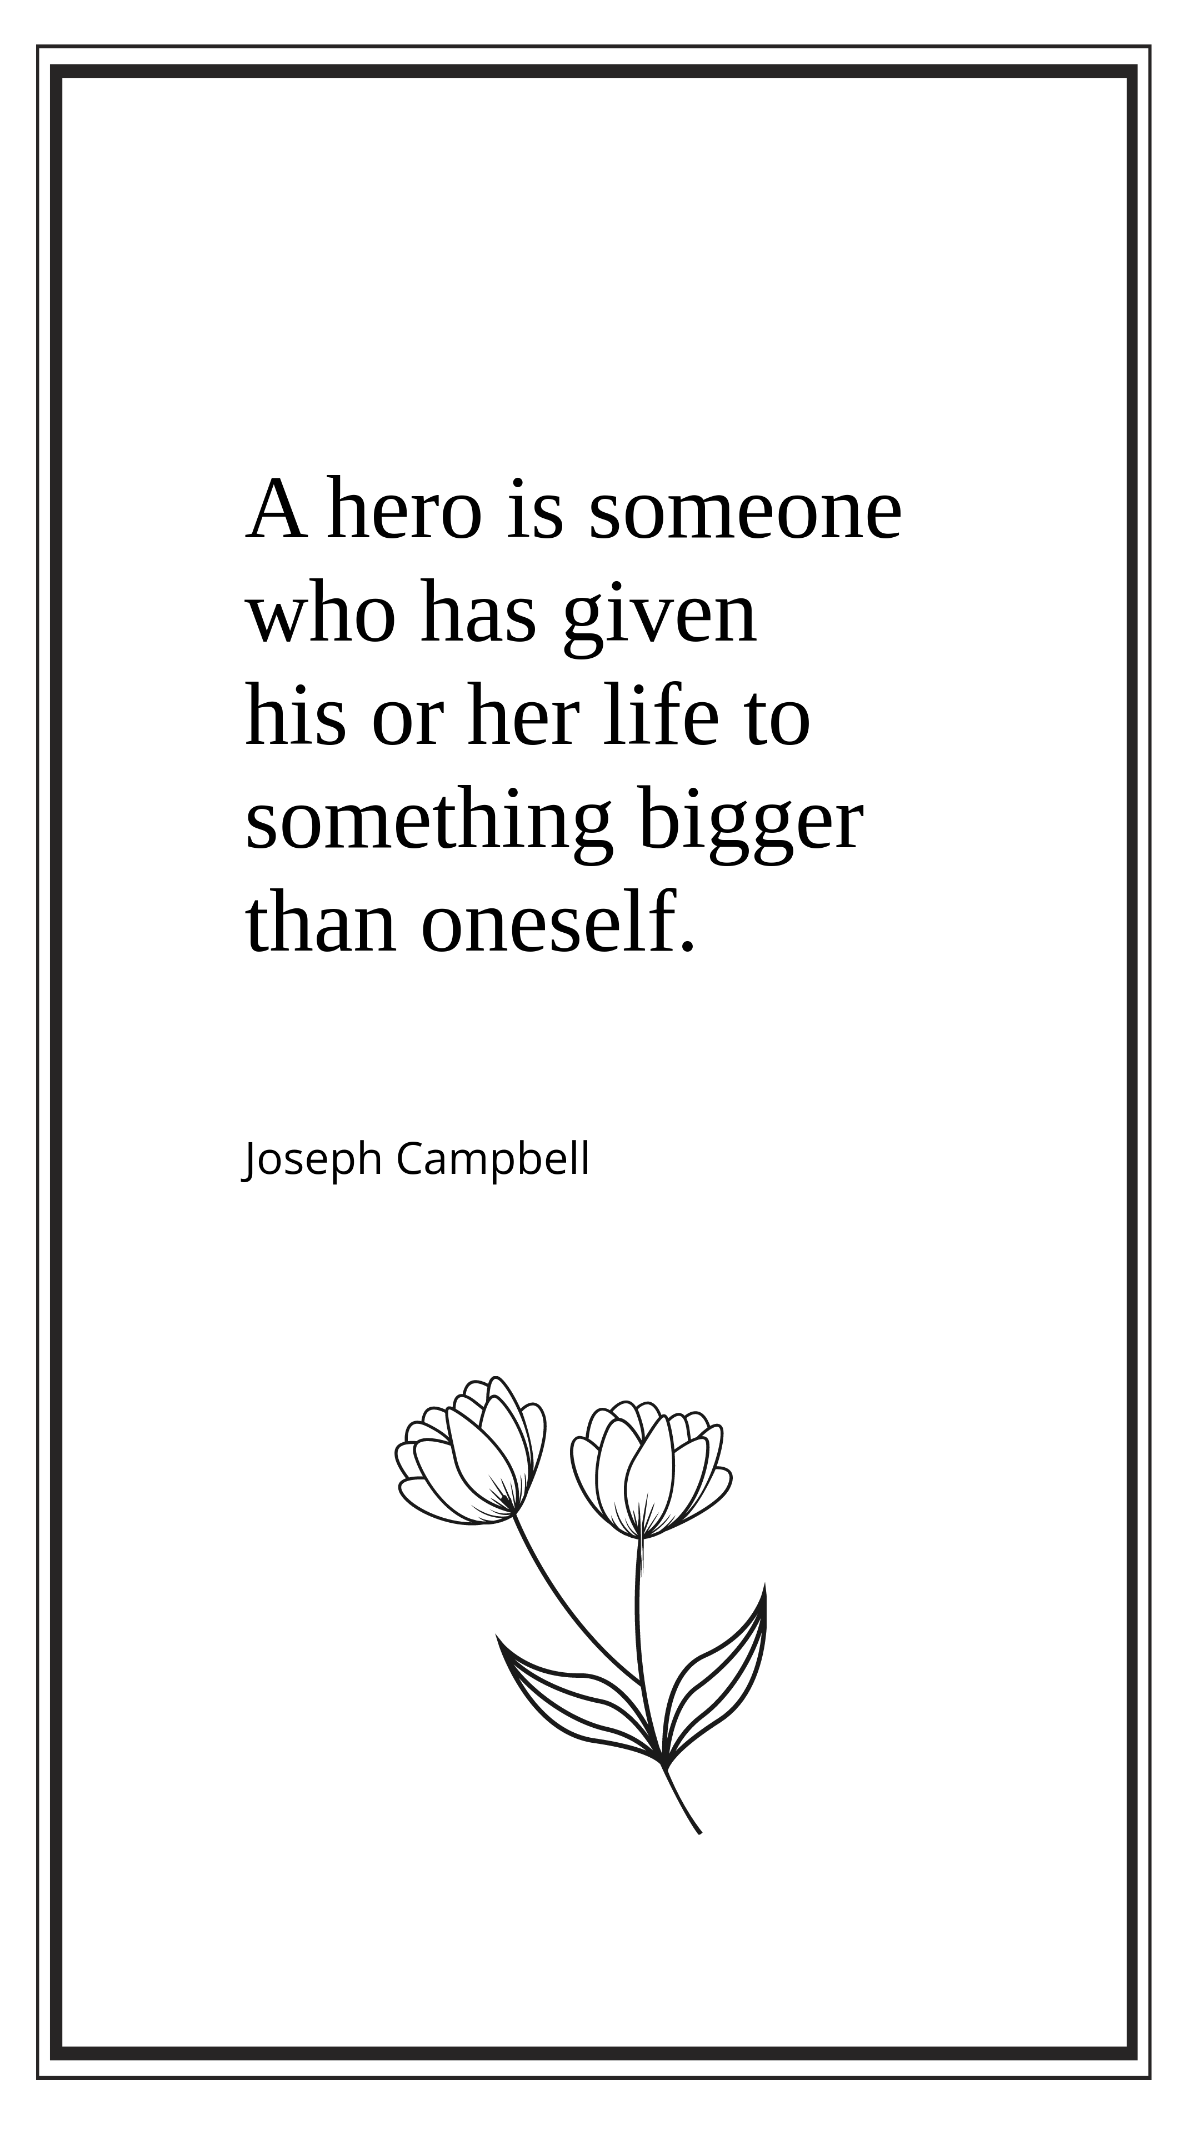 Joseph Campbell - A hero is someone who has given his or her life to something bigger than oneself. Template